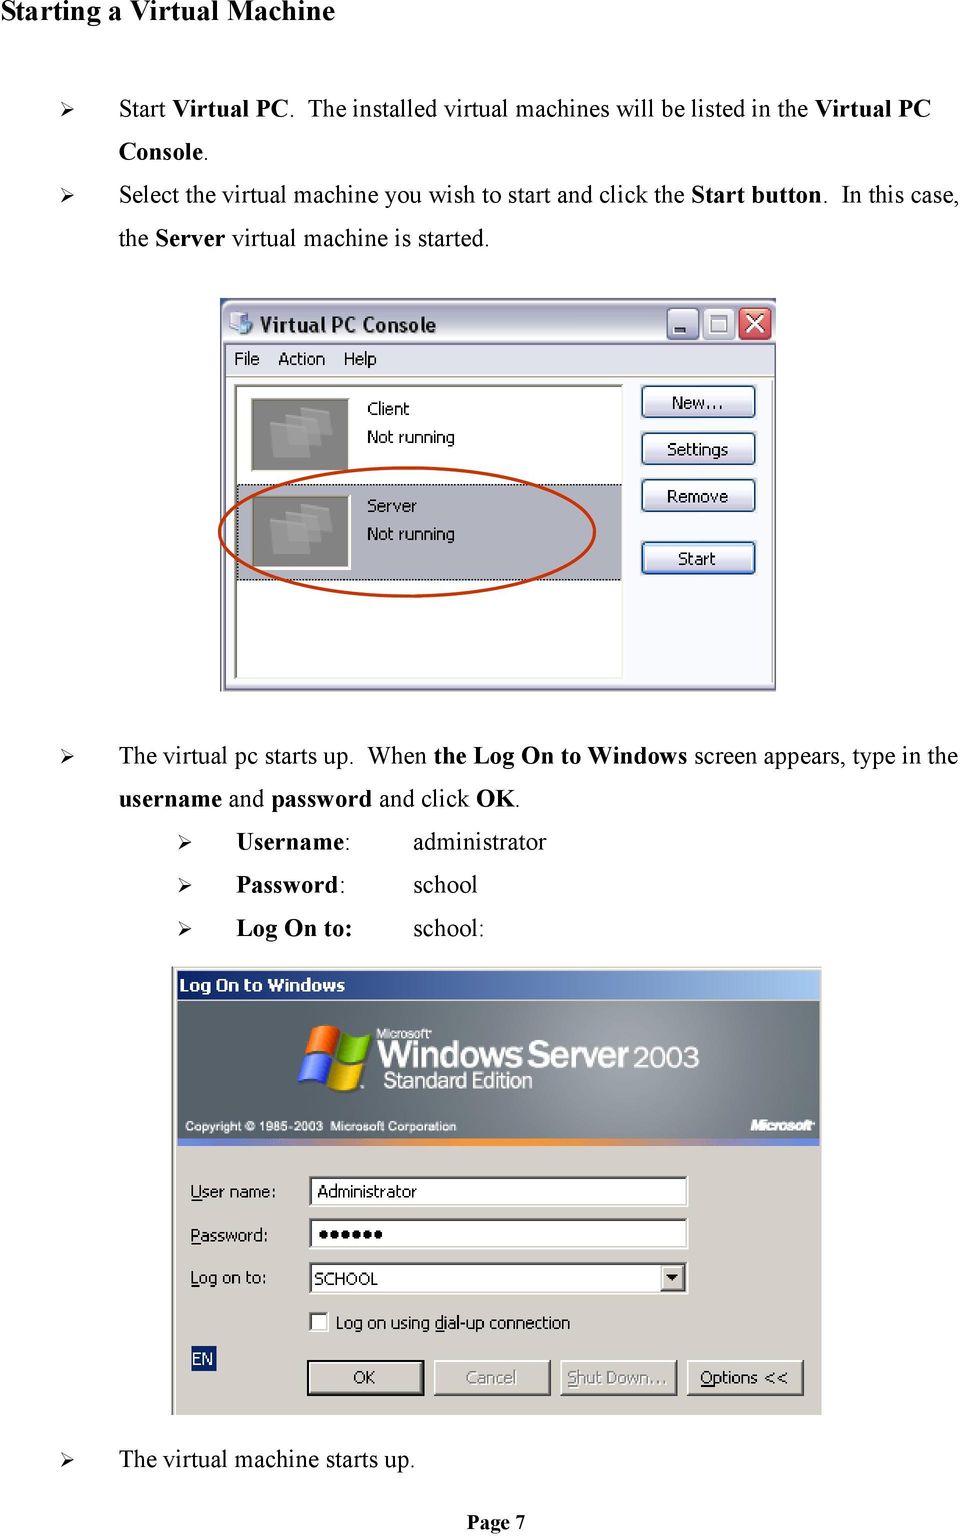 Select the virtual machine you wish to start and click the Start button.